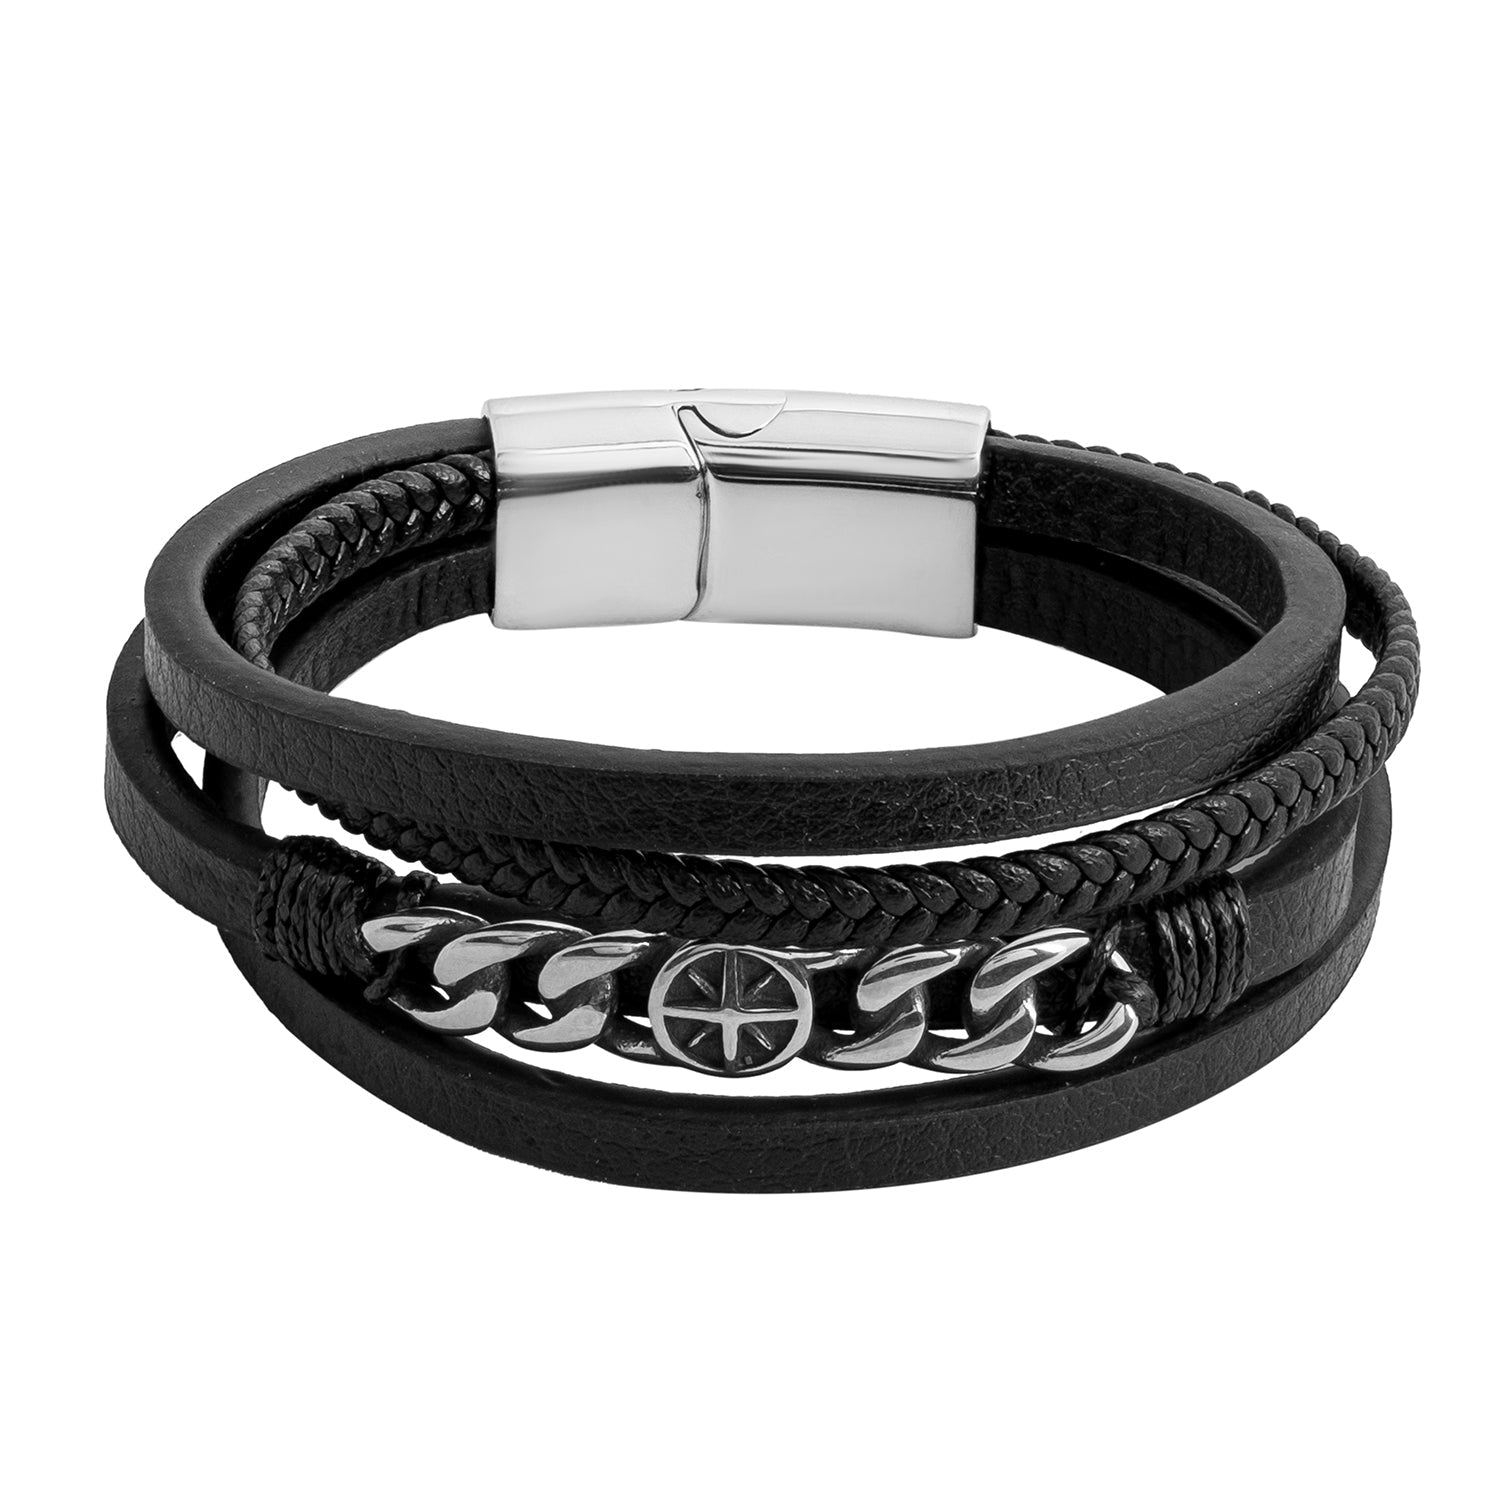 Braided Design Stainless Steel and Multilayer Leather Bracelet for